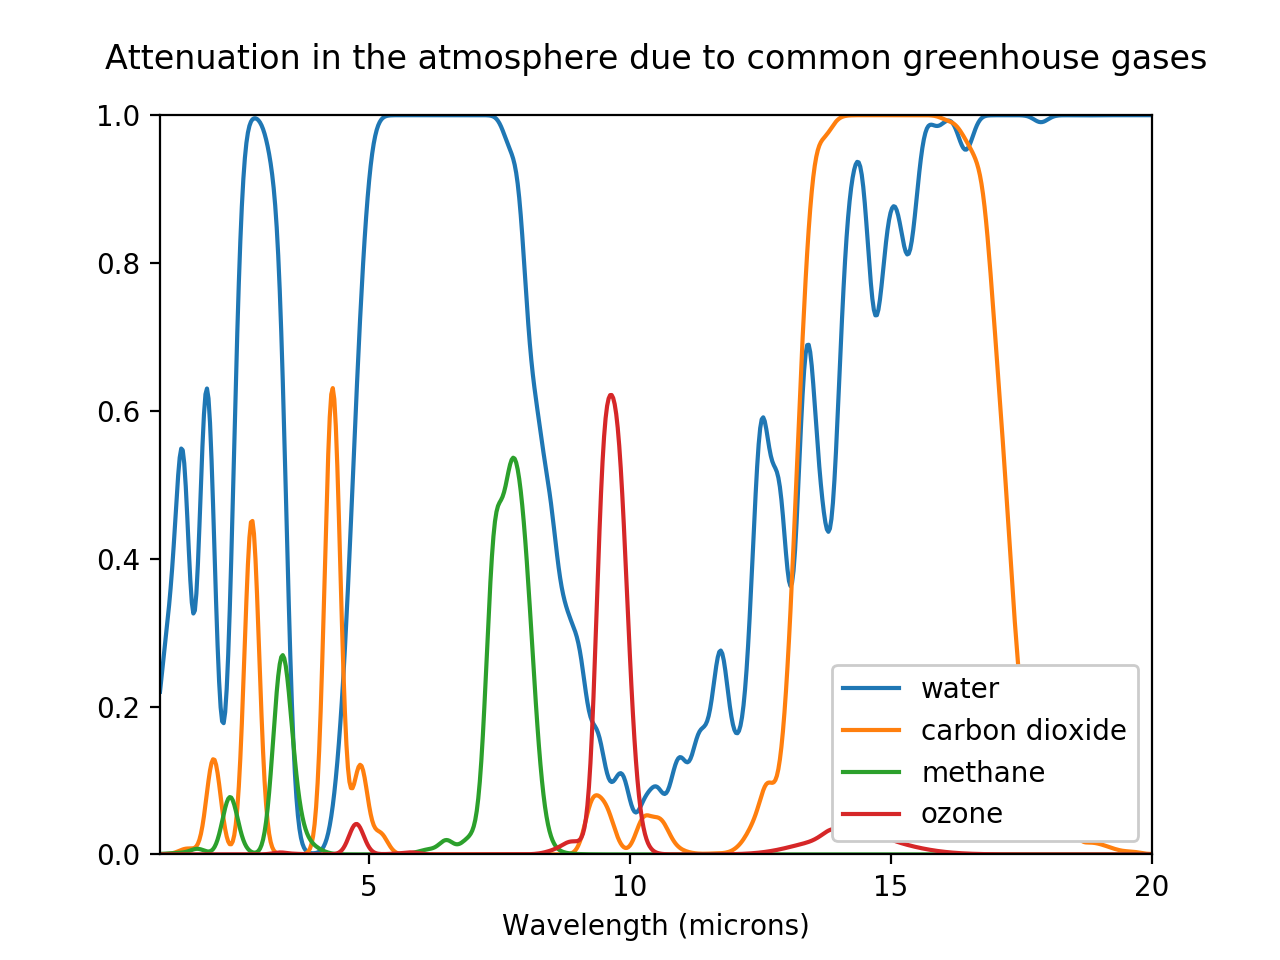 Attenuation of infrared light due to various gases. When the Earth emits infrared light, it can pass through the atmosphere unaffected or be absorbed by the atmosphere. For the four most important greenhouse gases, this figure shows the fraction of light at each wavelength that would be absorbed by that gas, assuming no other gas absorbs it instead. For example, the water and carbon dioxide in the atmosphere are separately capable of absorbing nearly 100% of light at a wavelength of 16 microns. At 13 microns, water and carbon dioxide are separately capable of absorbing roughly 50% of the emissions, so together they absorb about 75%.